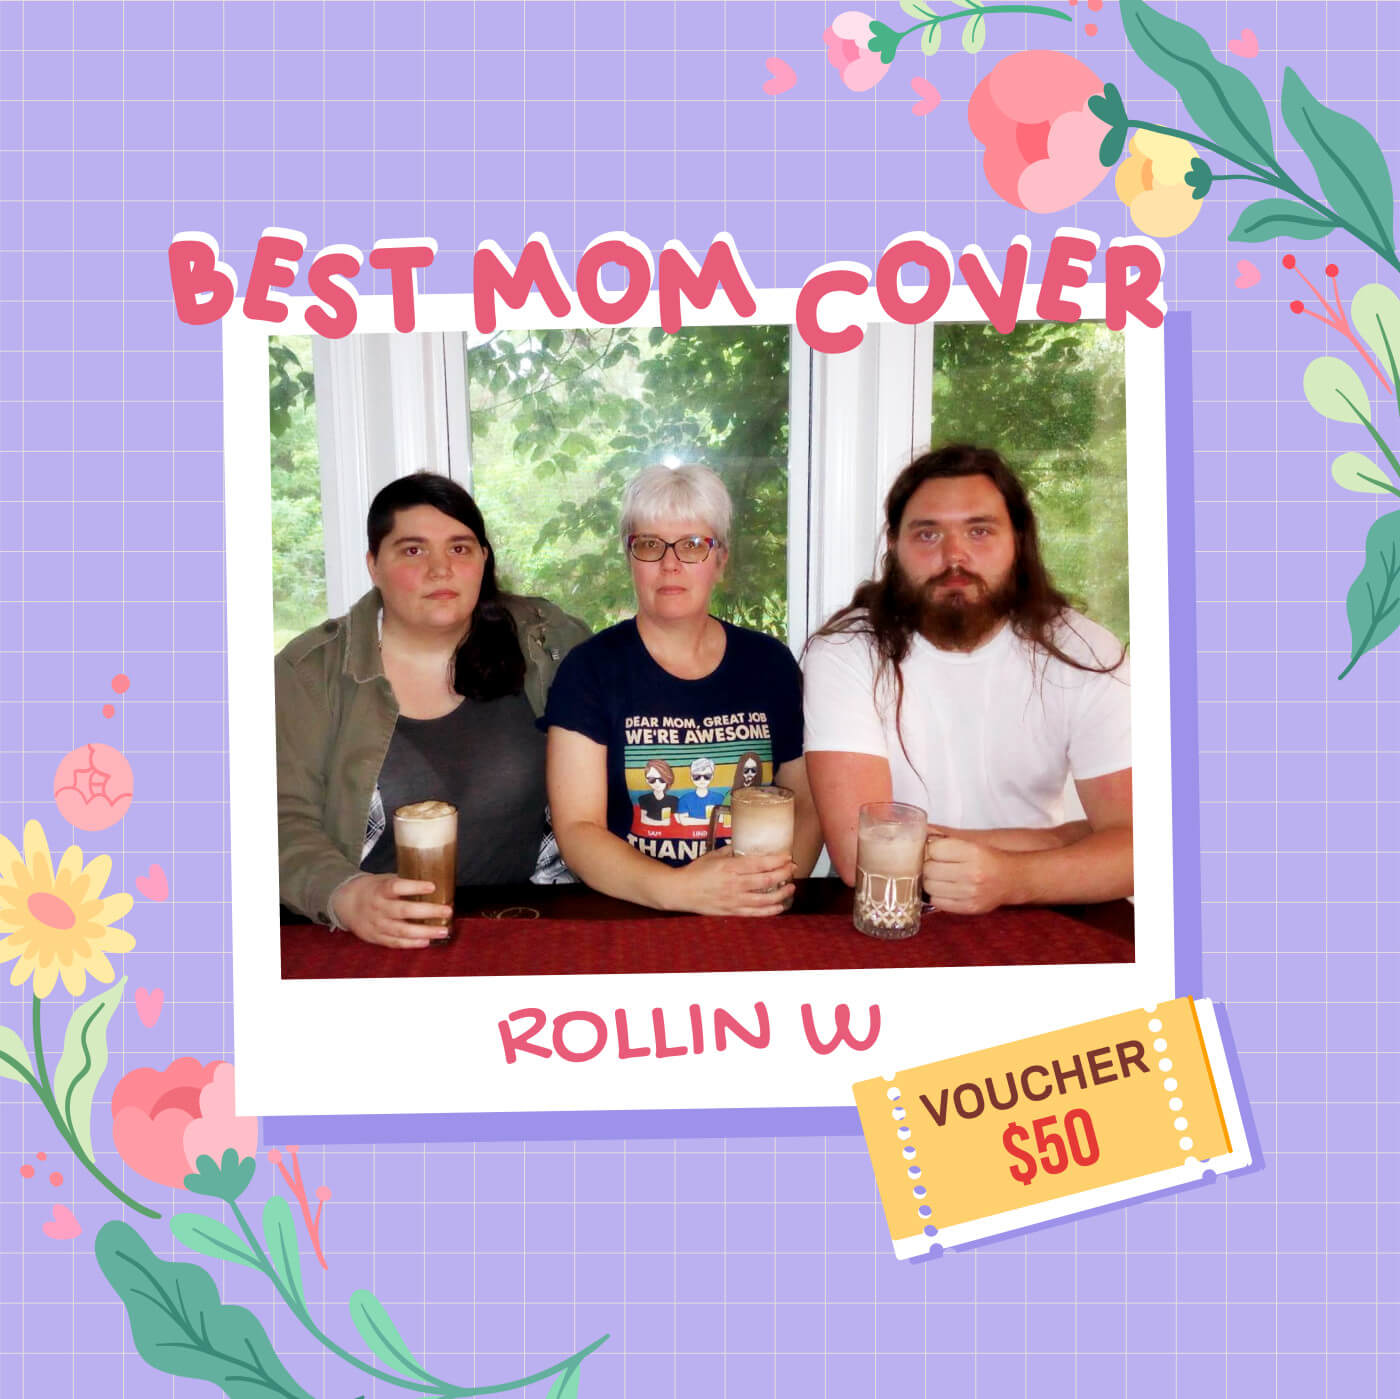 Best Mom Cover Contest